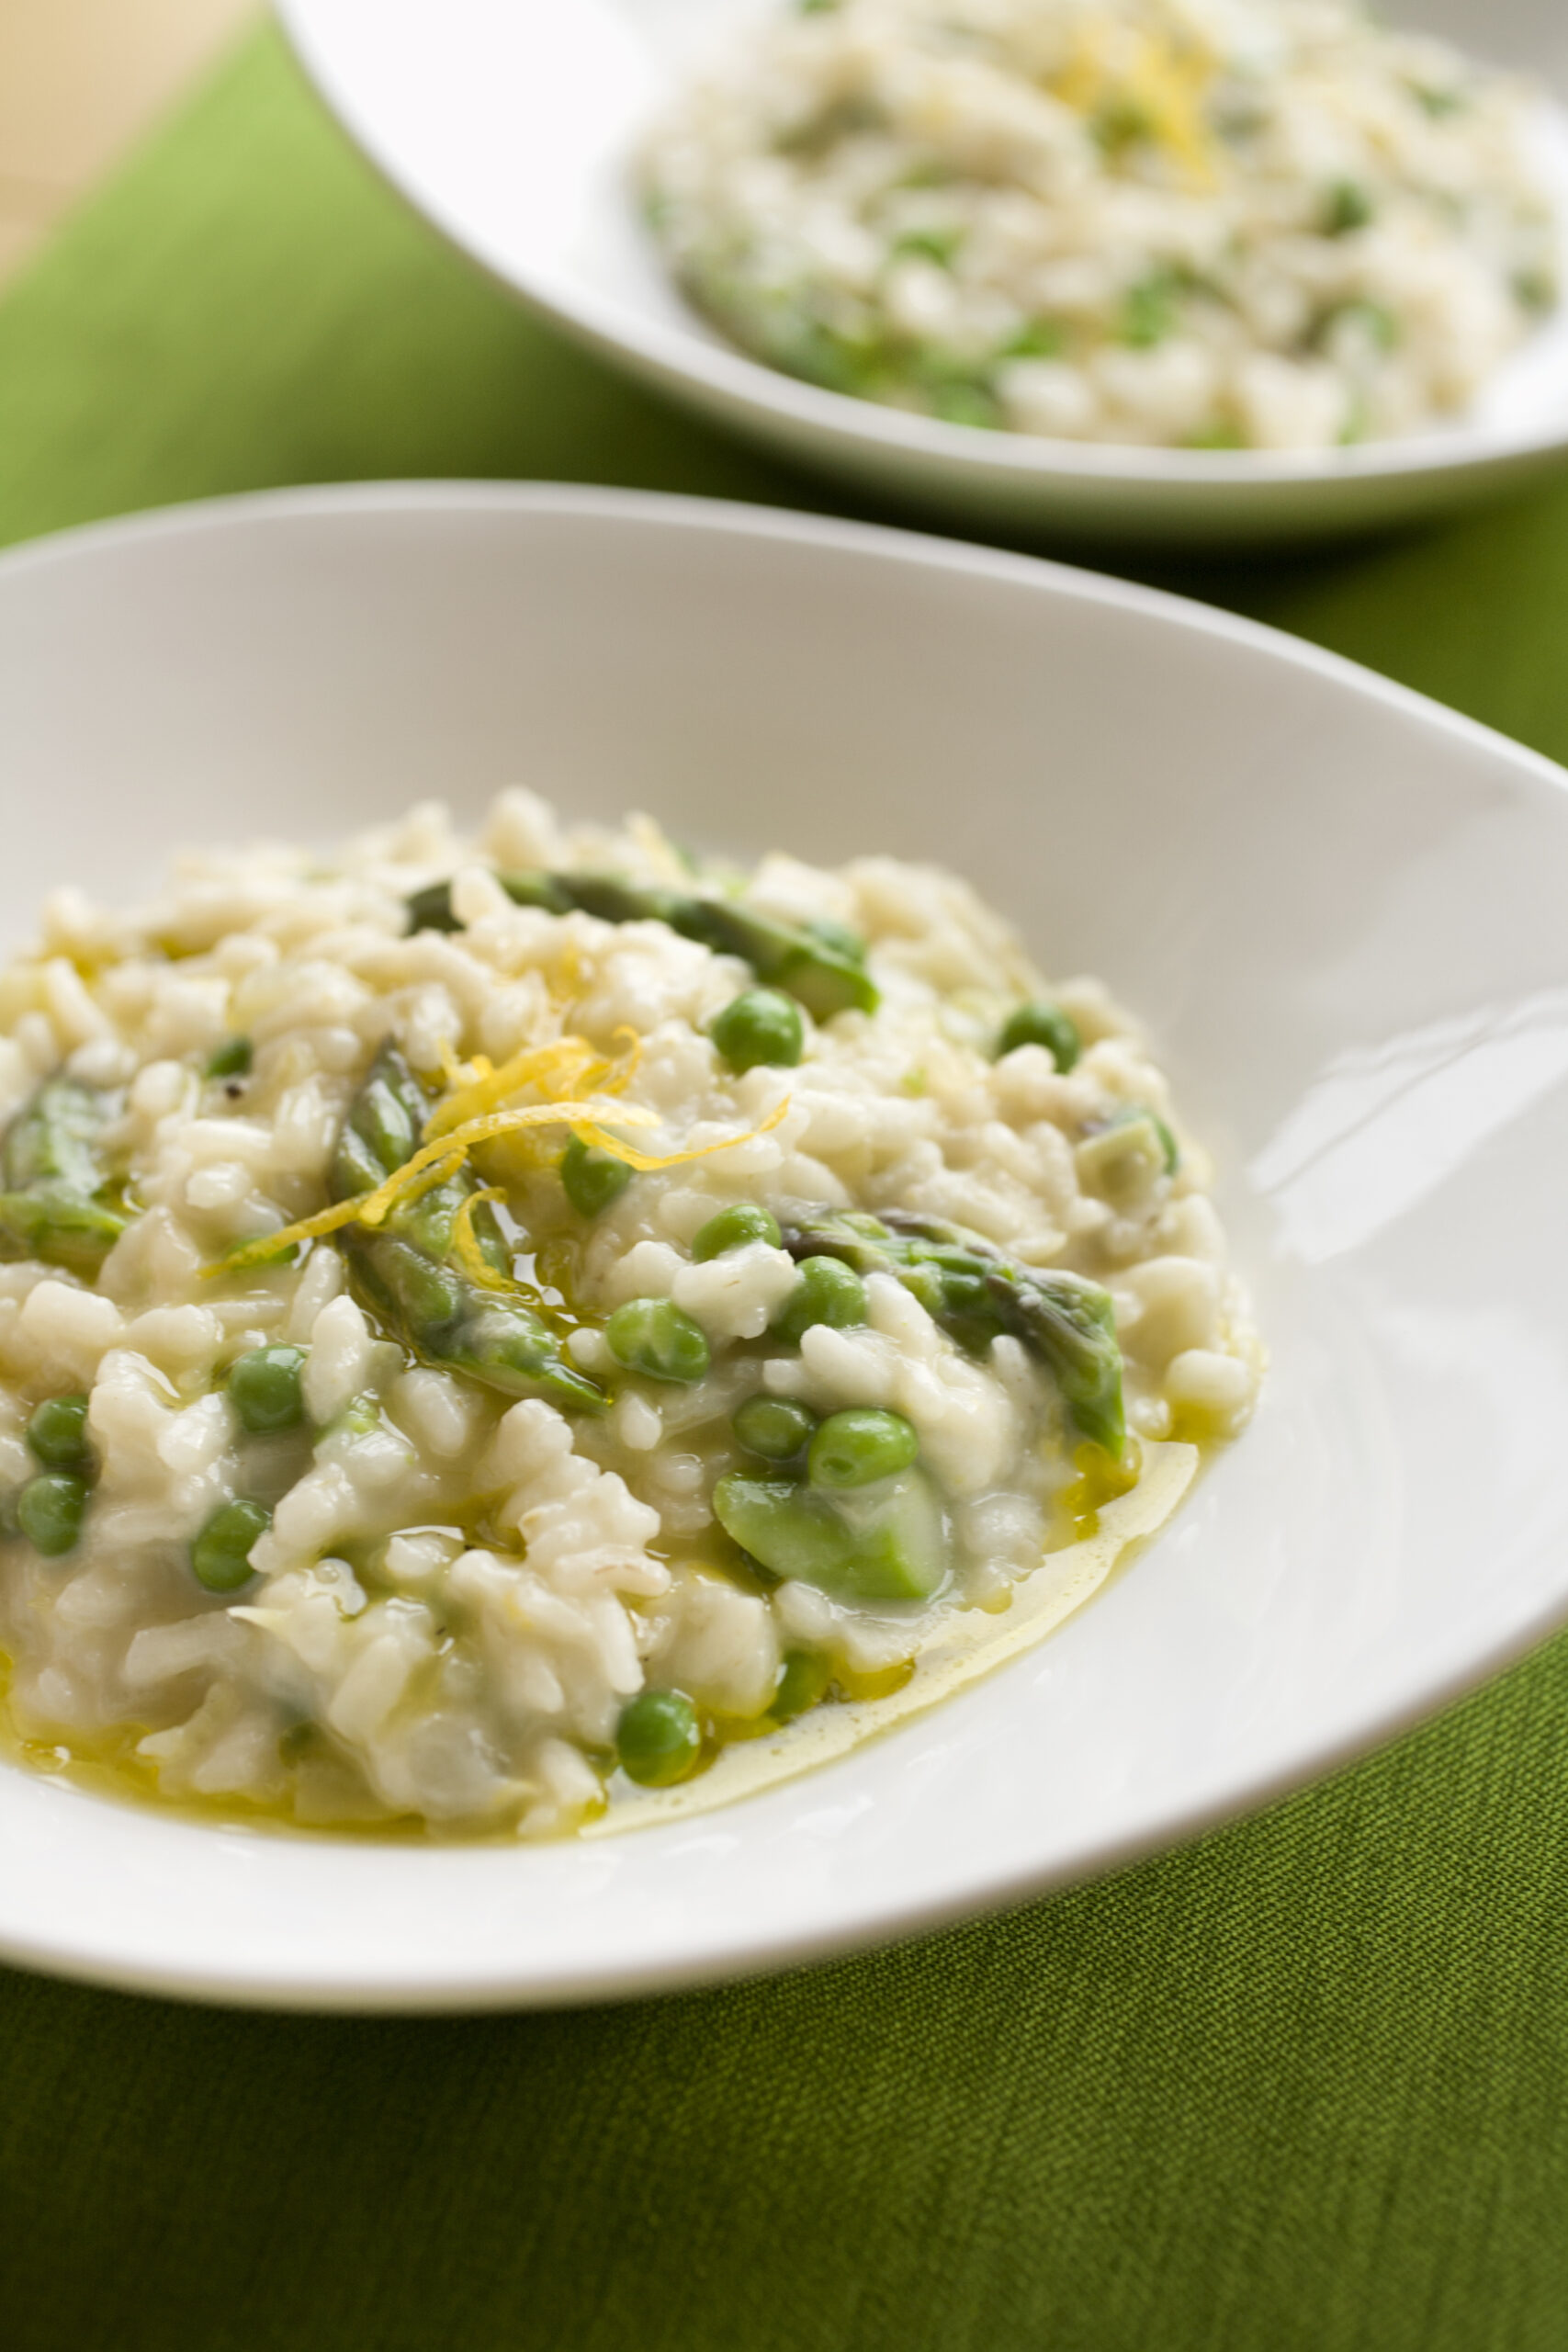 "Two servings of risotto with fresh green peas, asparagus spears and garnished with grated lemon zest.  Served in modern, white bowls on a bright green table runner."